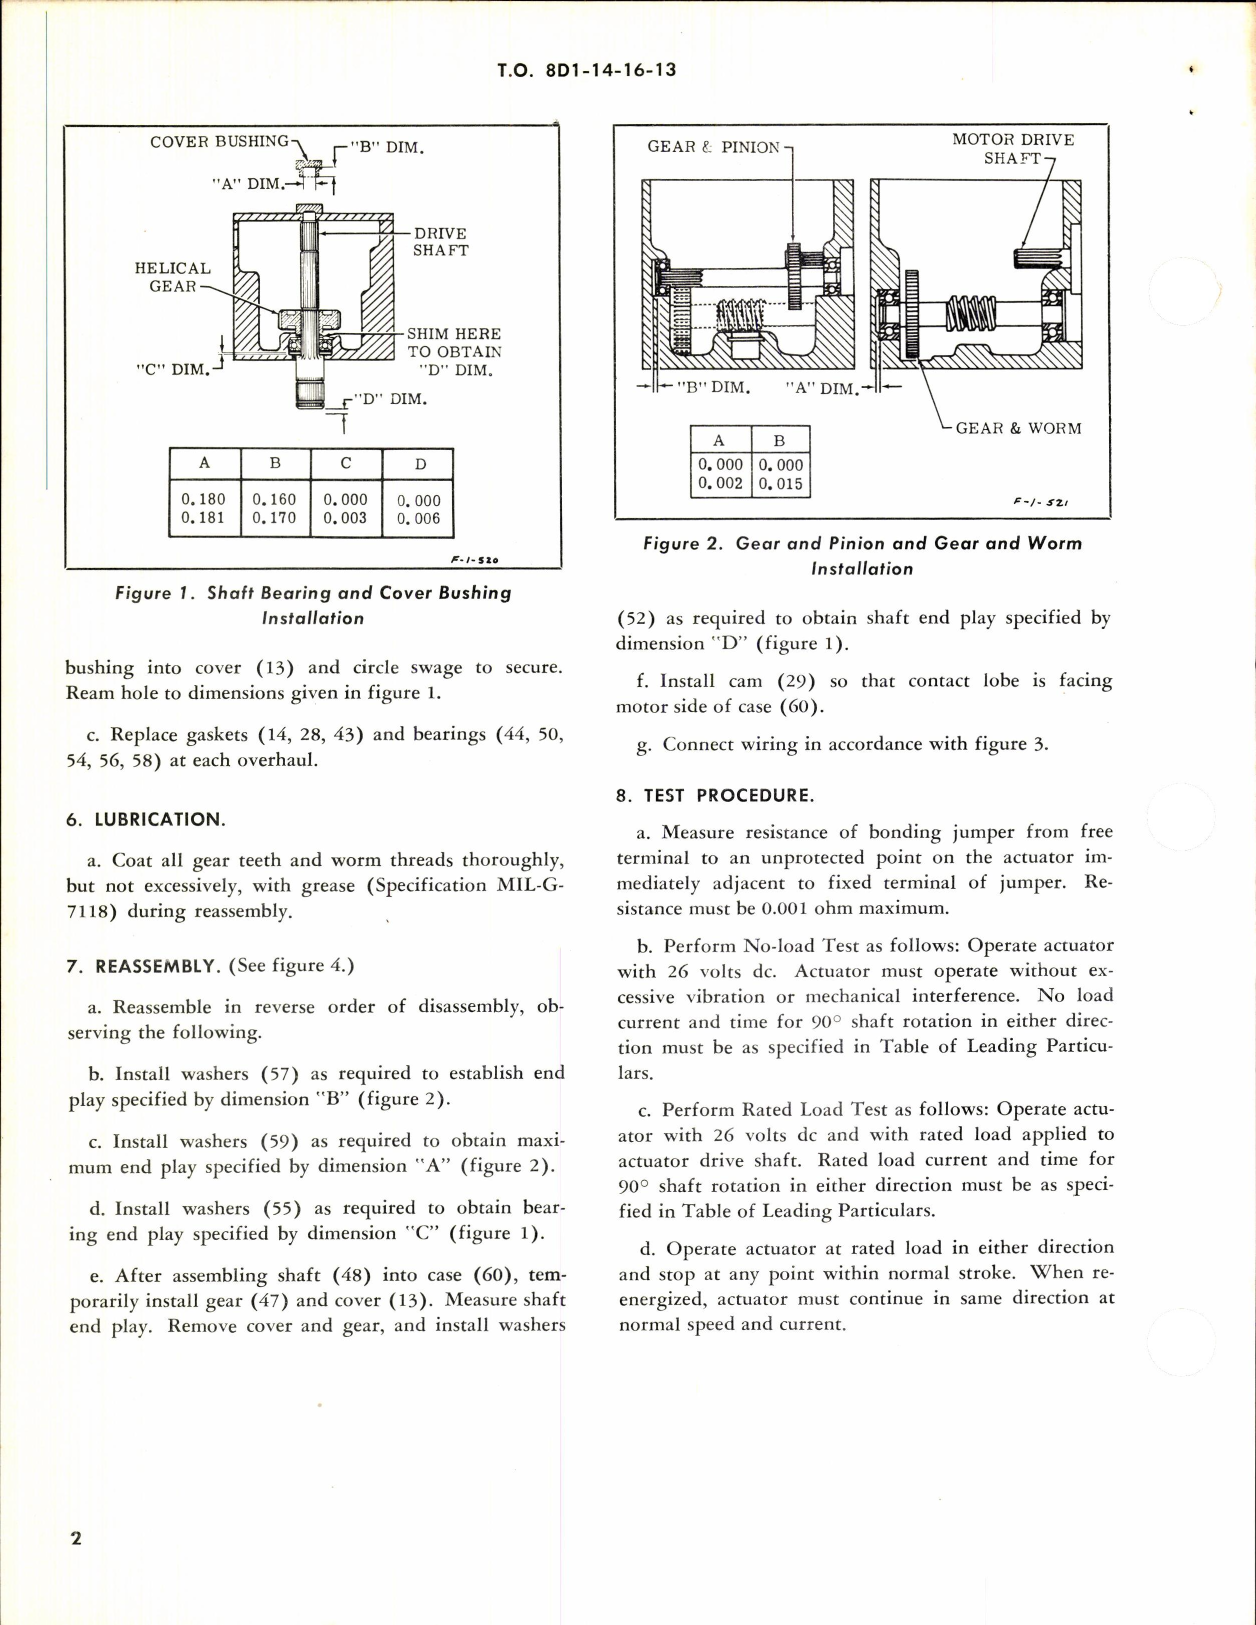 Sample page 2 from AirCorps Library document: Overhaul Instructions w Parts Breakdown Torque Actuator